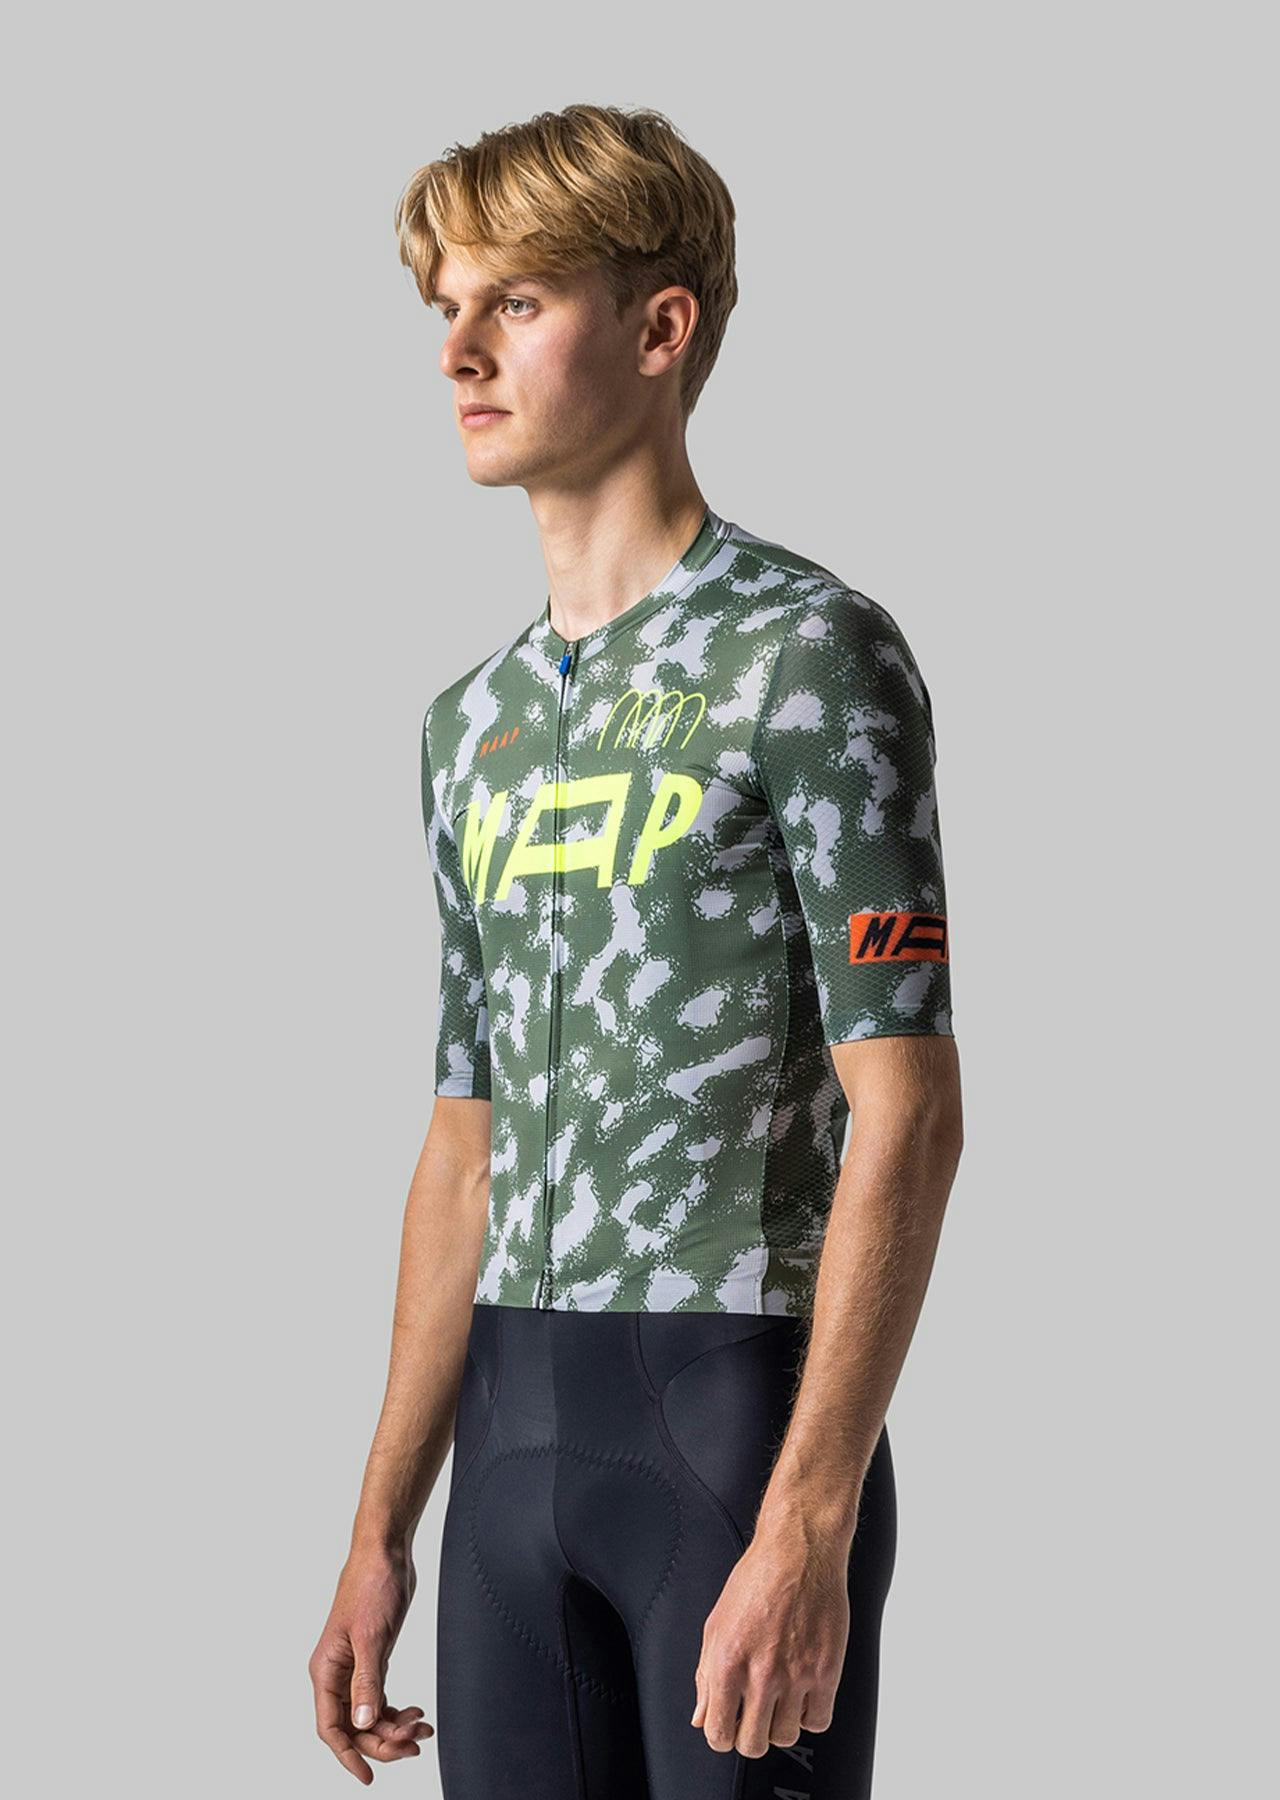 Adapted I.S Pro Air Jersey